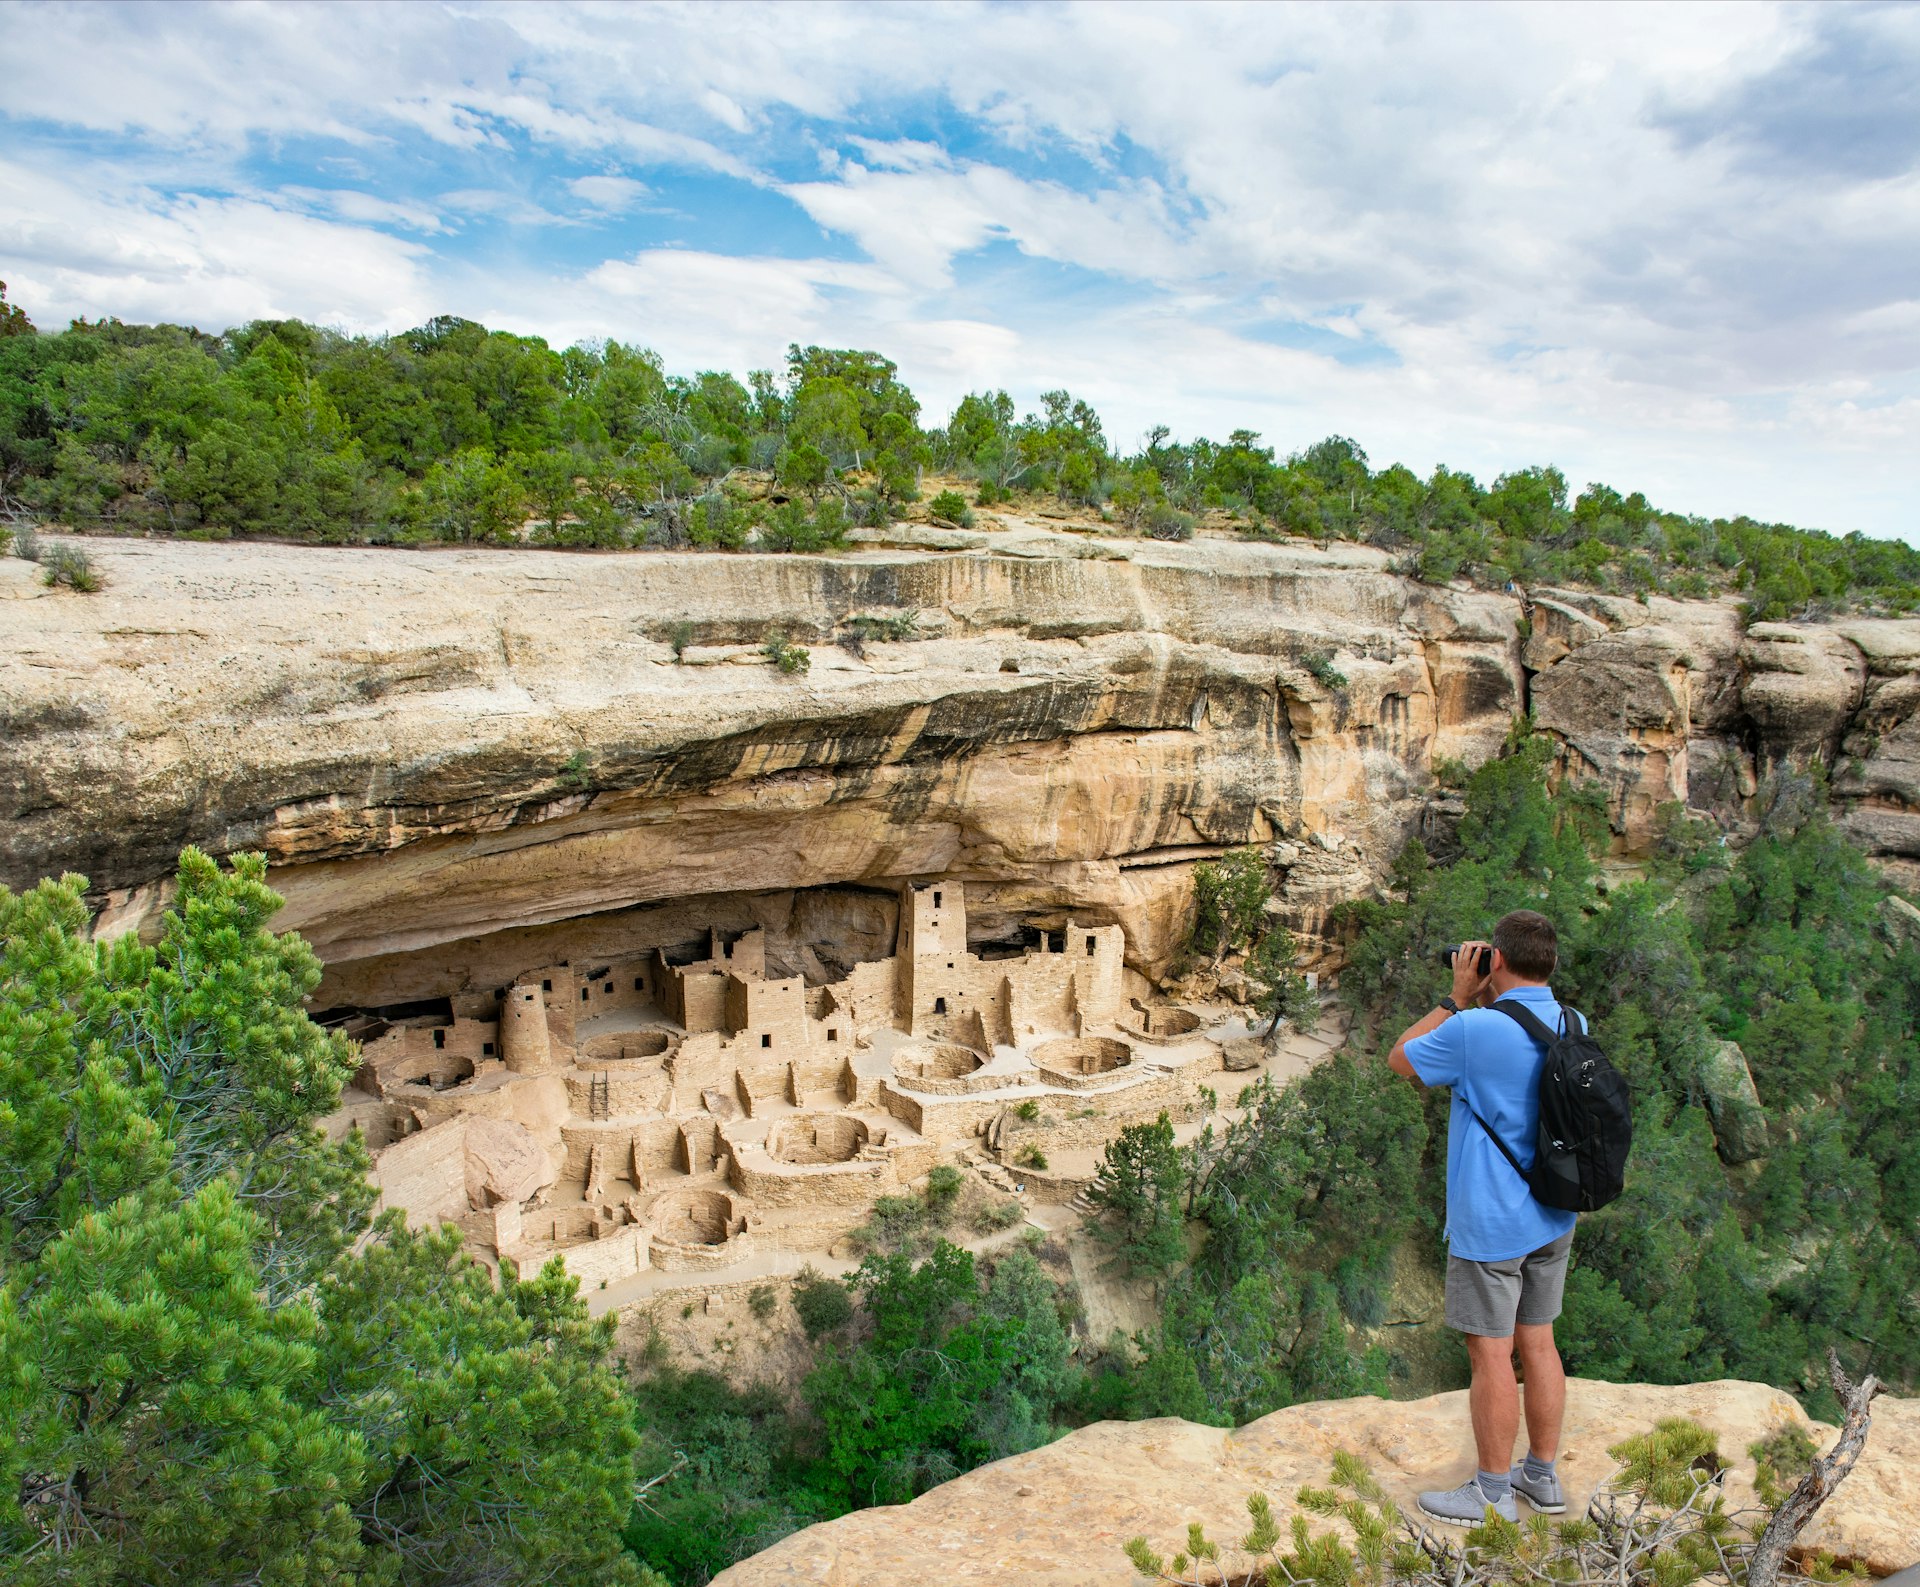 Man on vacation taking photos of the Ancestral Puebloan cliff dwellings at Mesa Verde National Park in Colorado